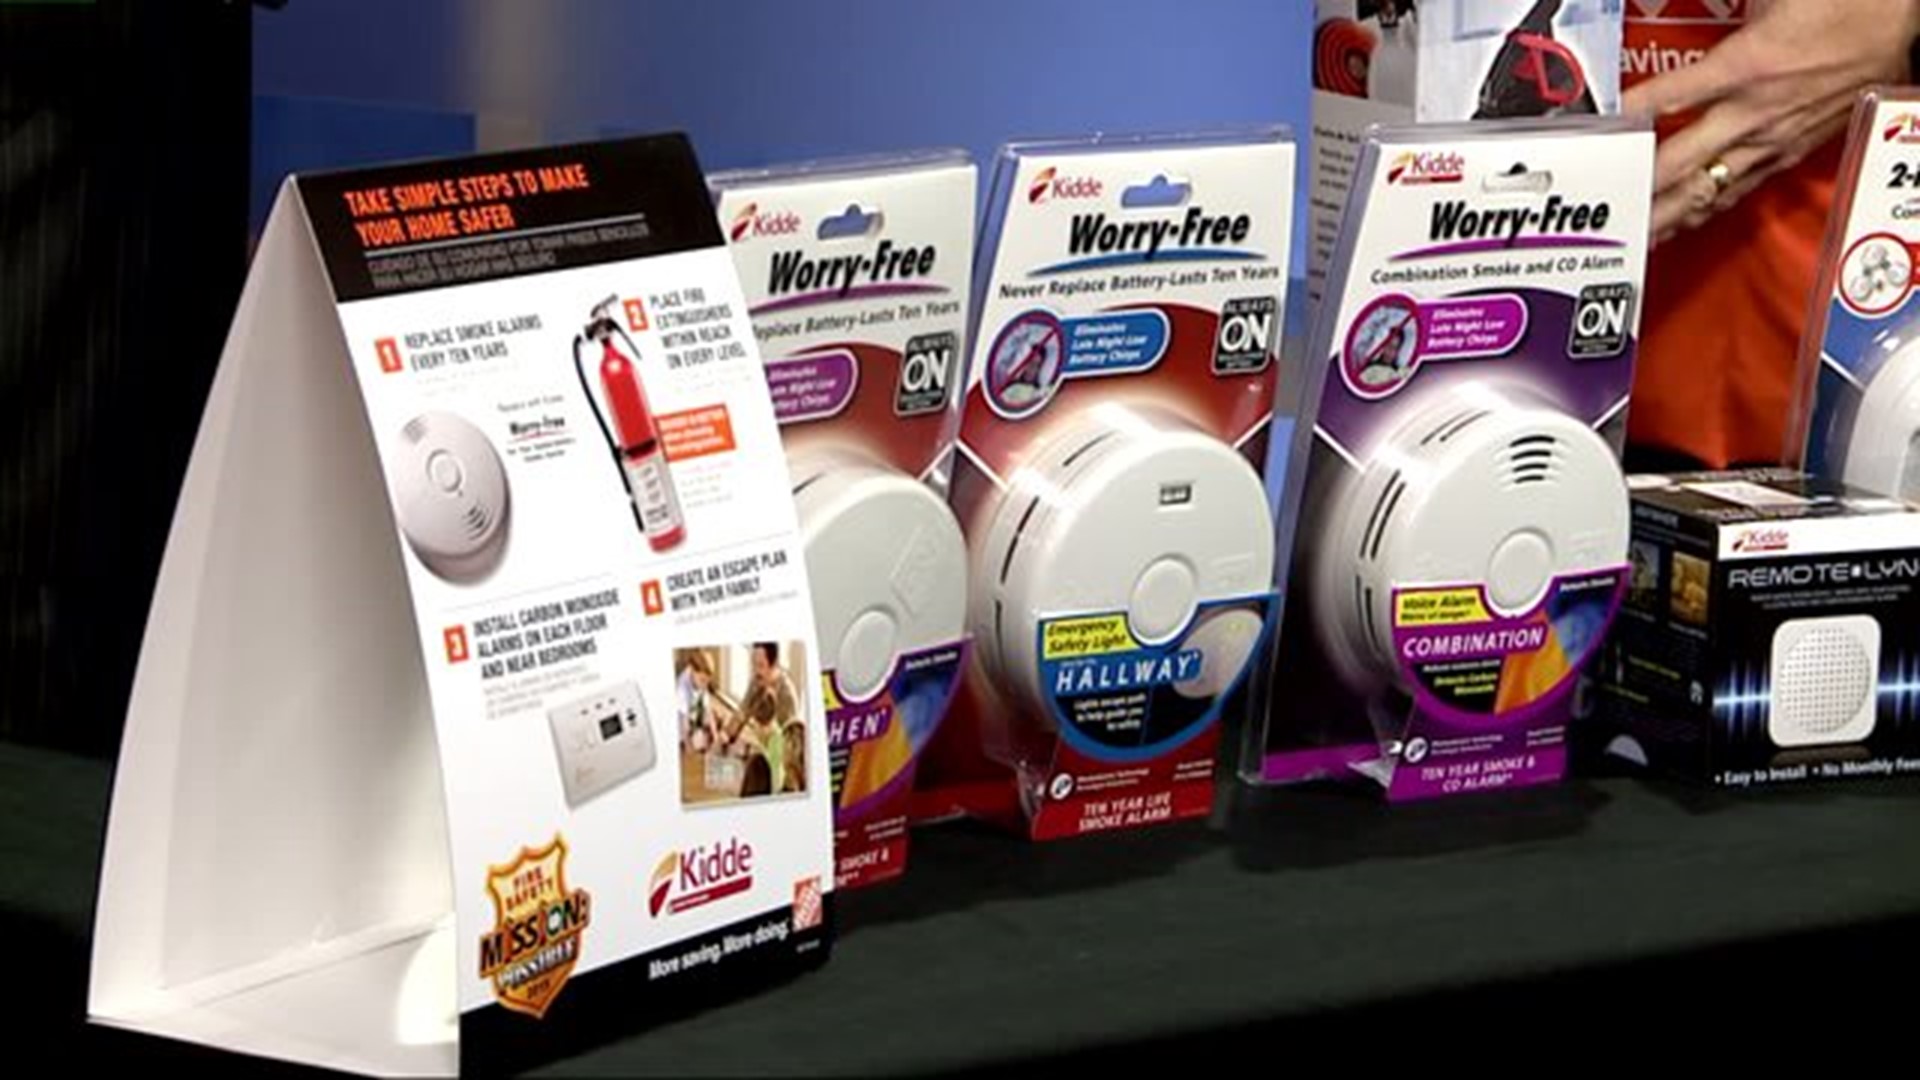 Keep your family safe with the latest in fire prevention technology